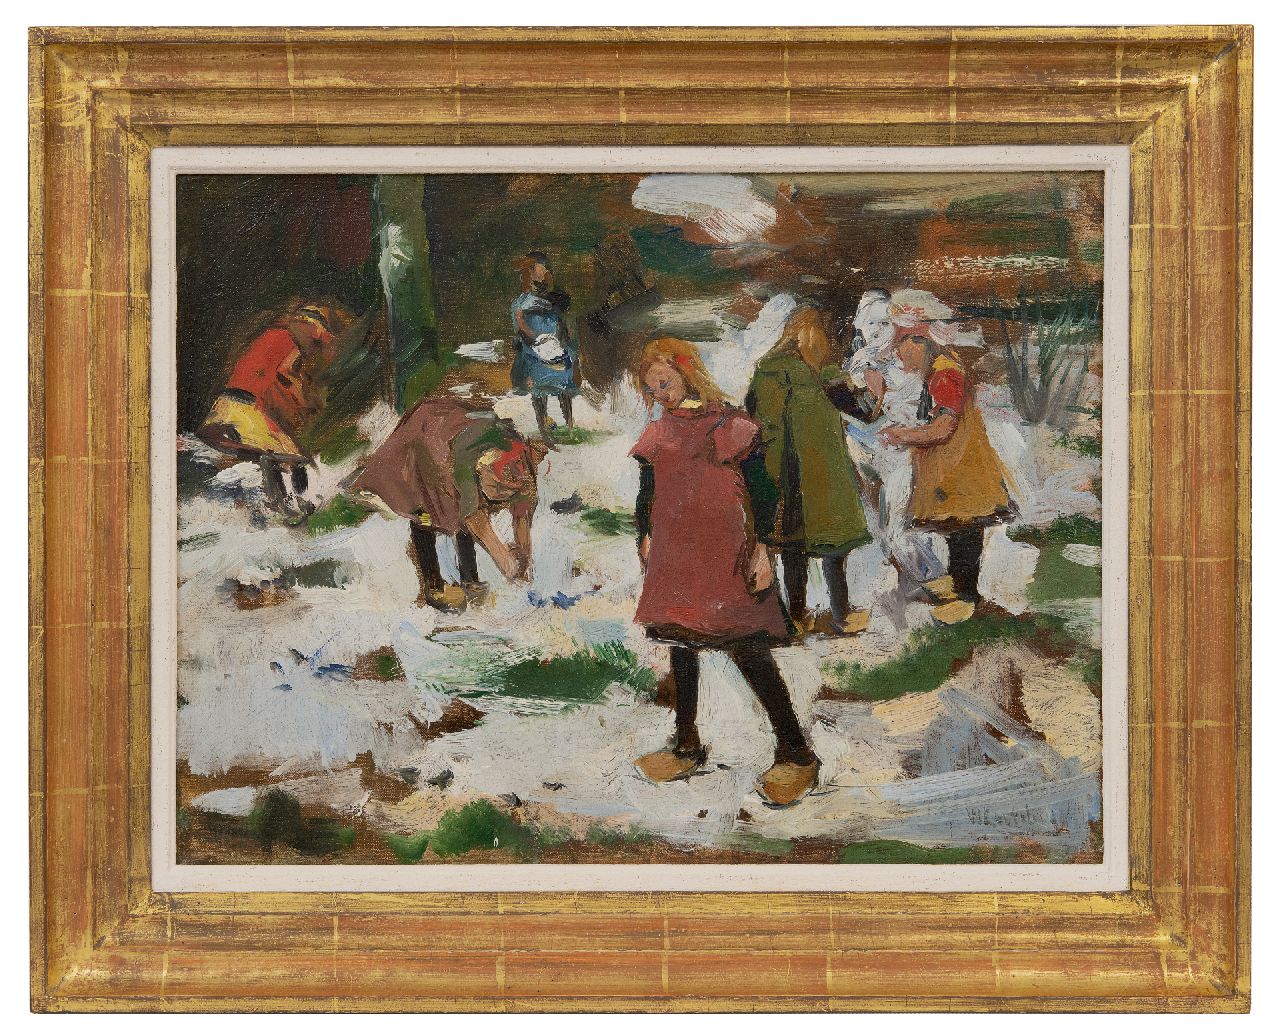 Korteling W.  | Willem Korteling, Children playing in the snow, oil on canvas 33.5 x 44.3 cm, signed l.r.